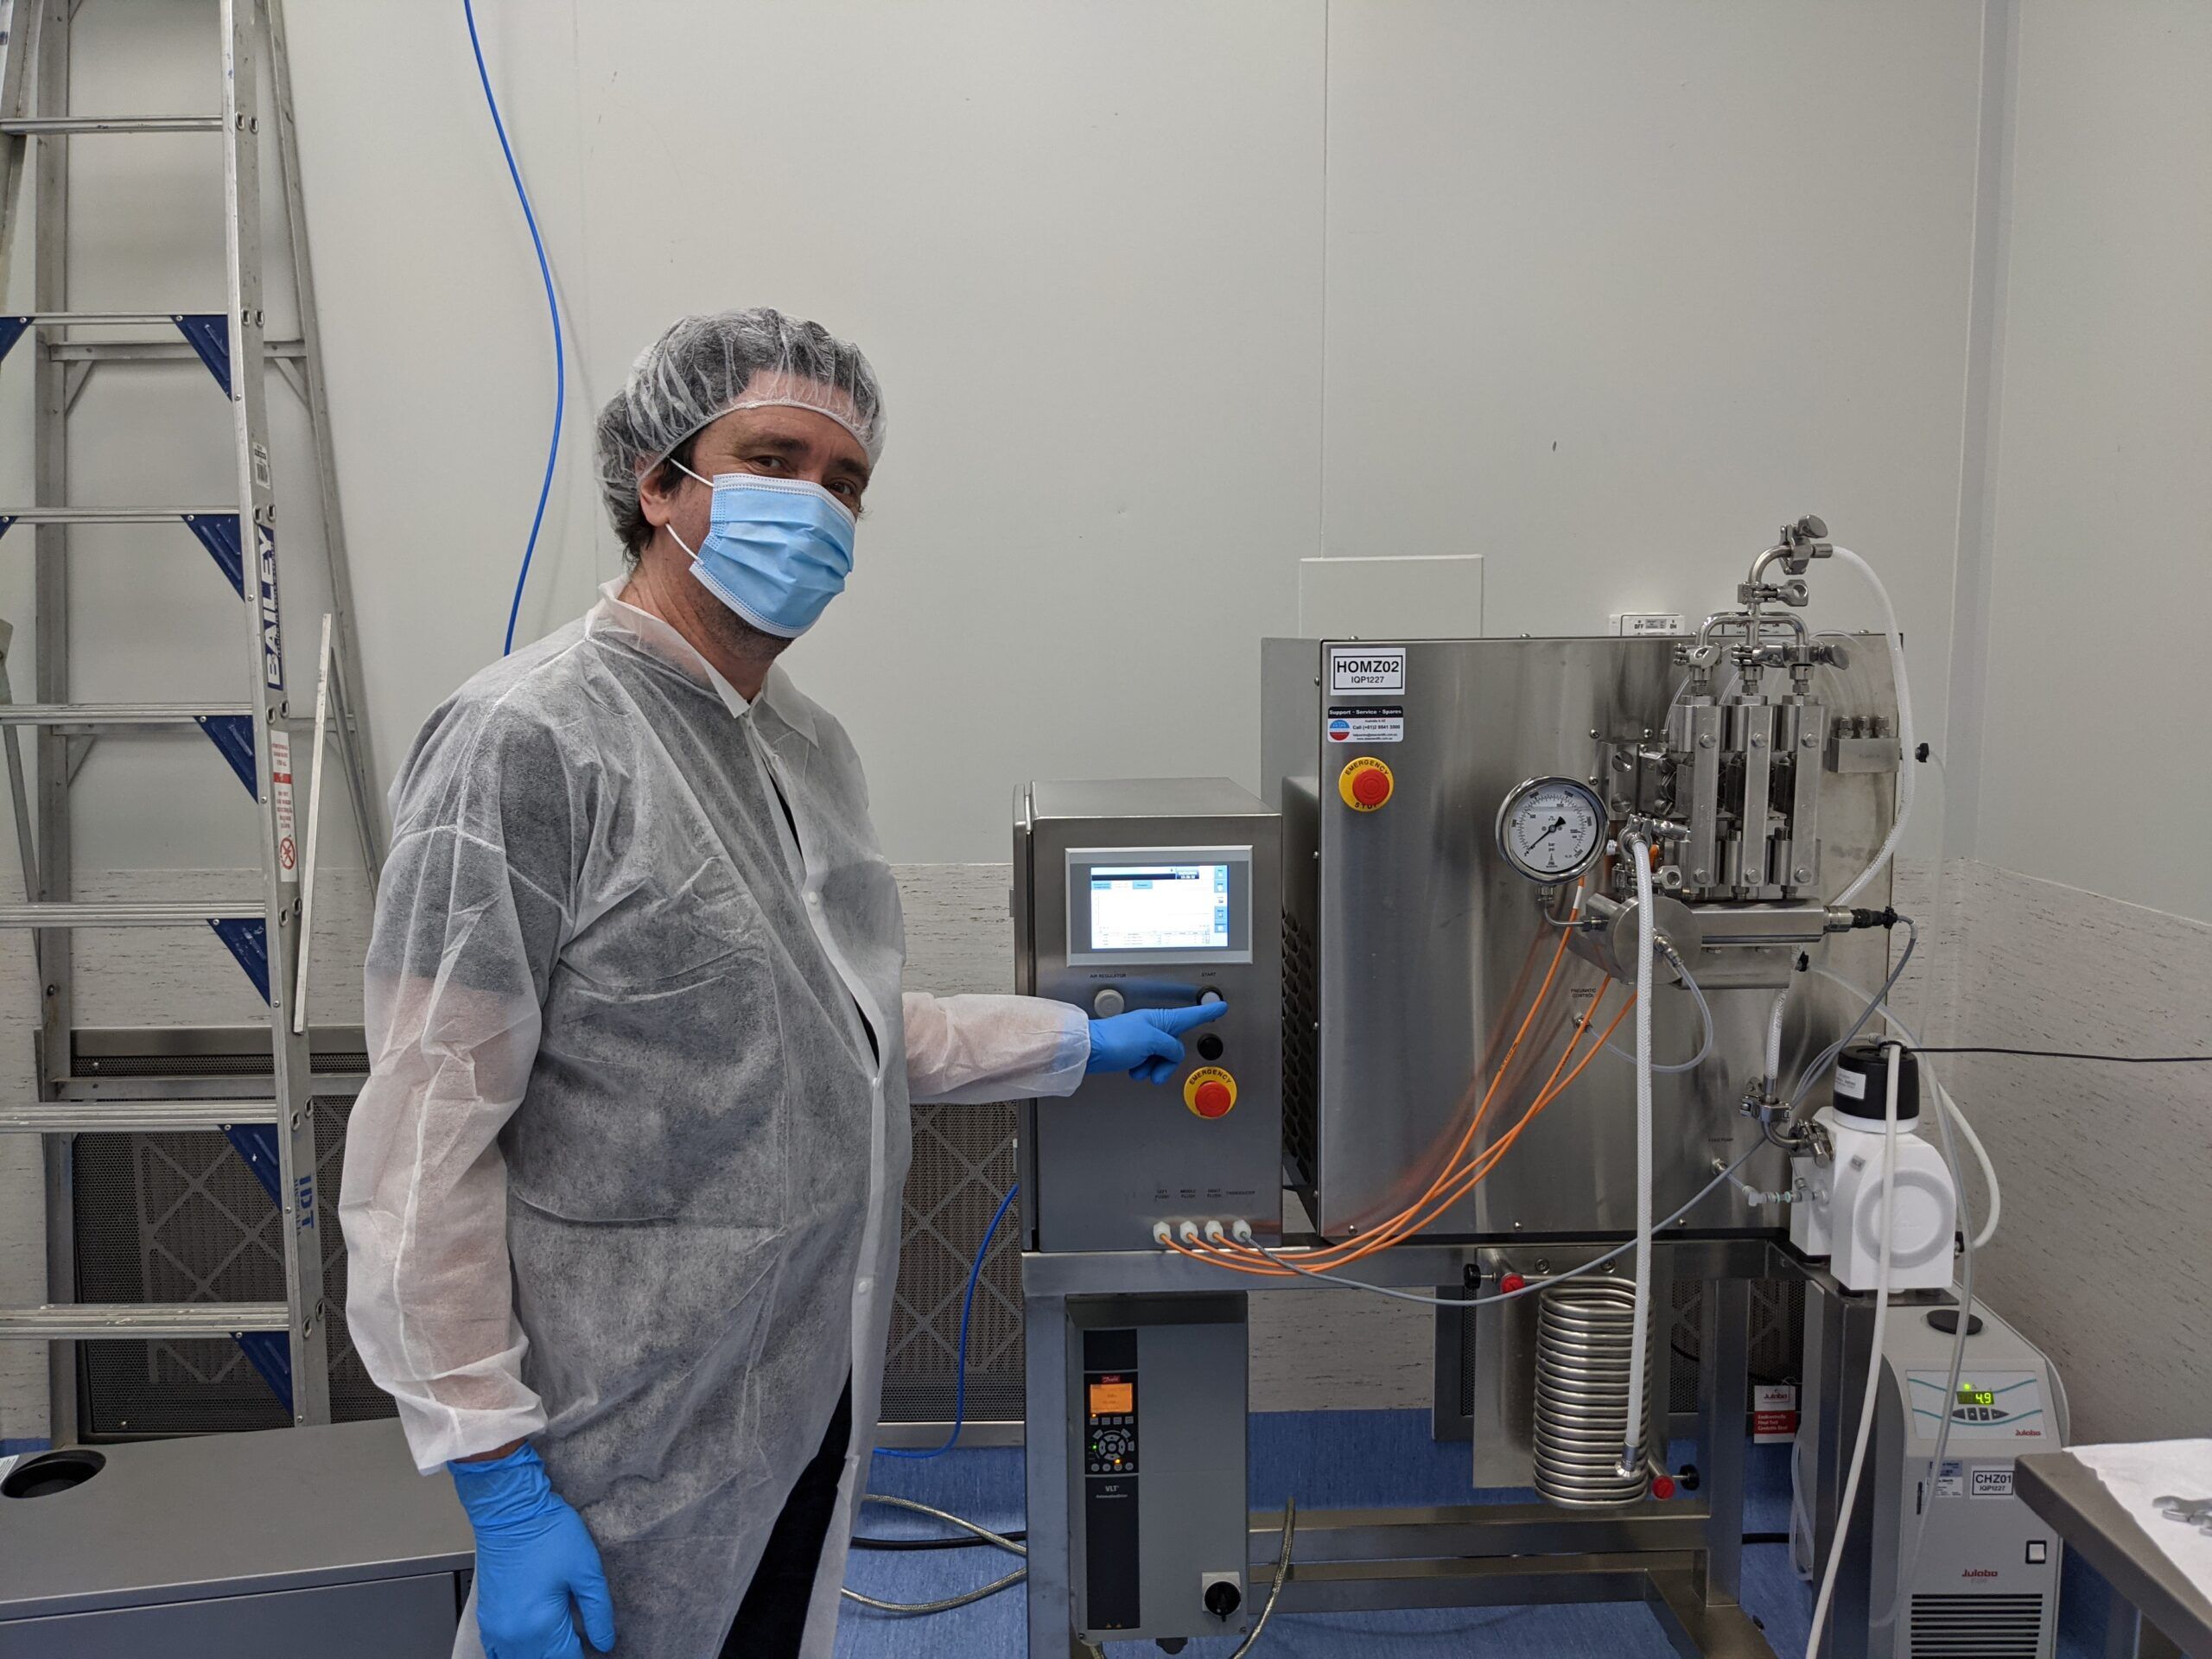 IDT expands commercial scale pharmaceutical manufacturing